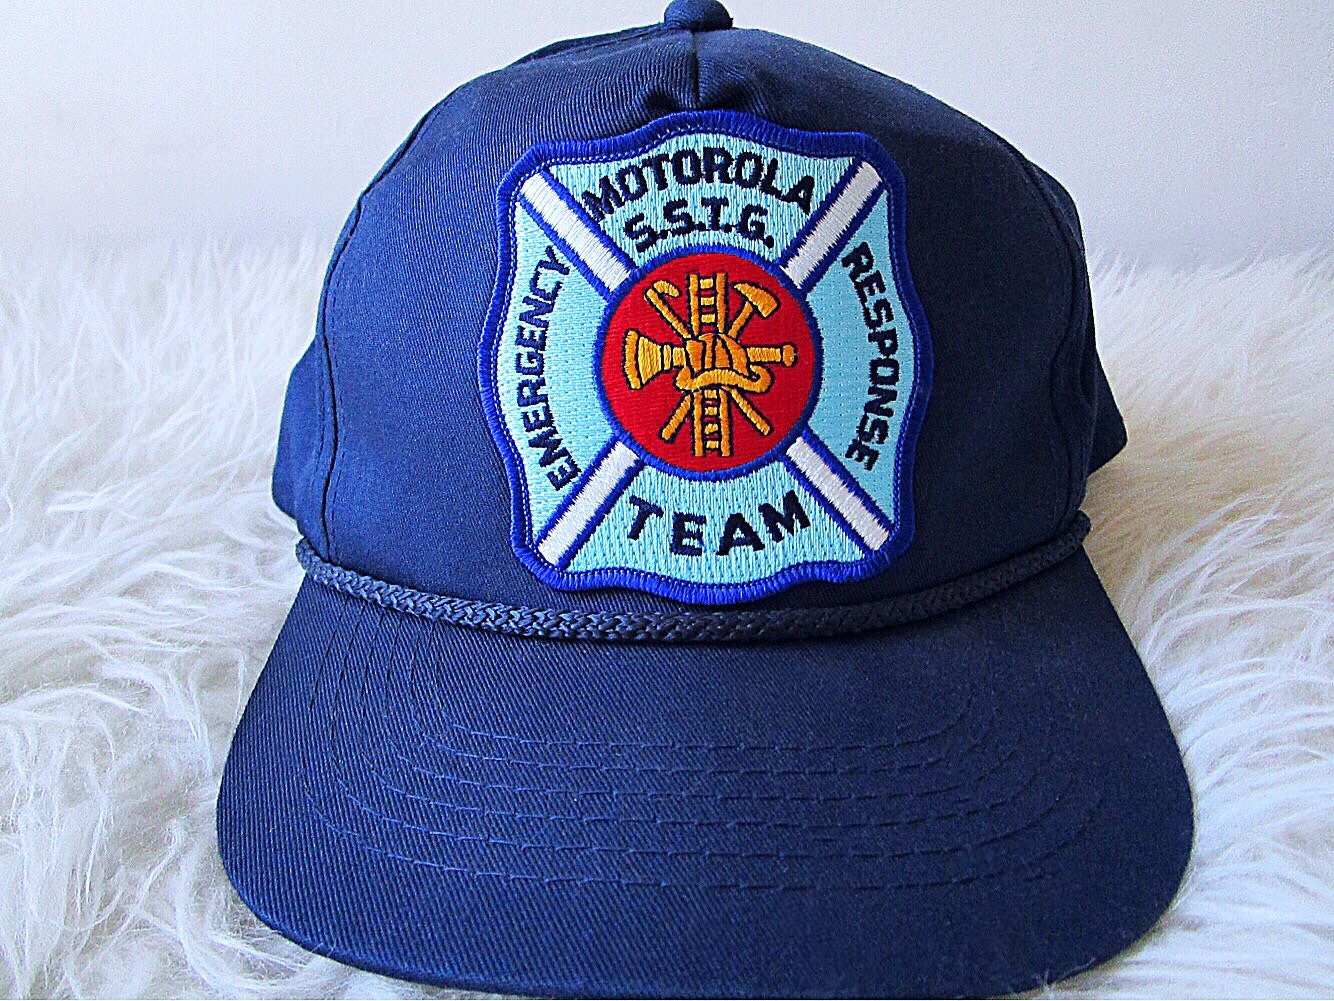 Vintage 90's FIREFIGHTER Emergency Response Team Space and Systems Technology Group Motorola Embroidered Patch SNAPBACK Hat